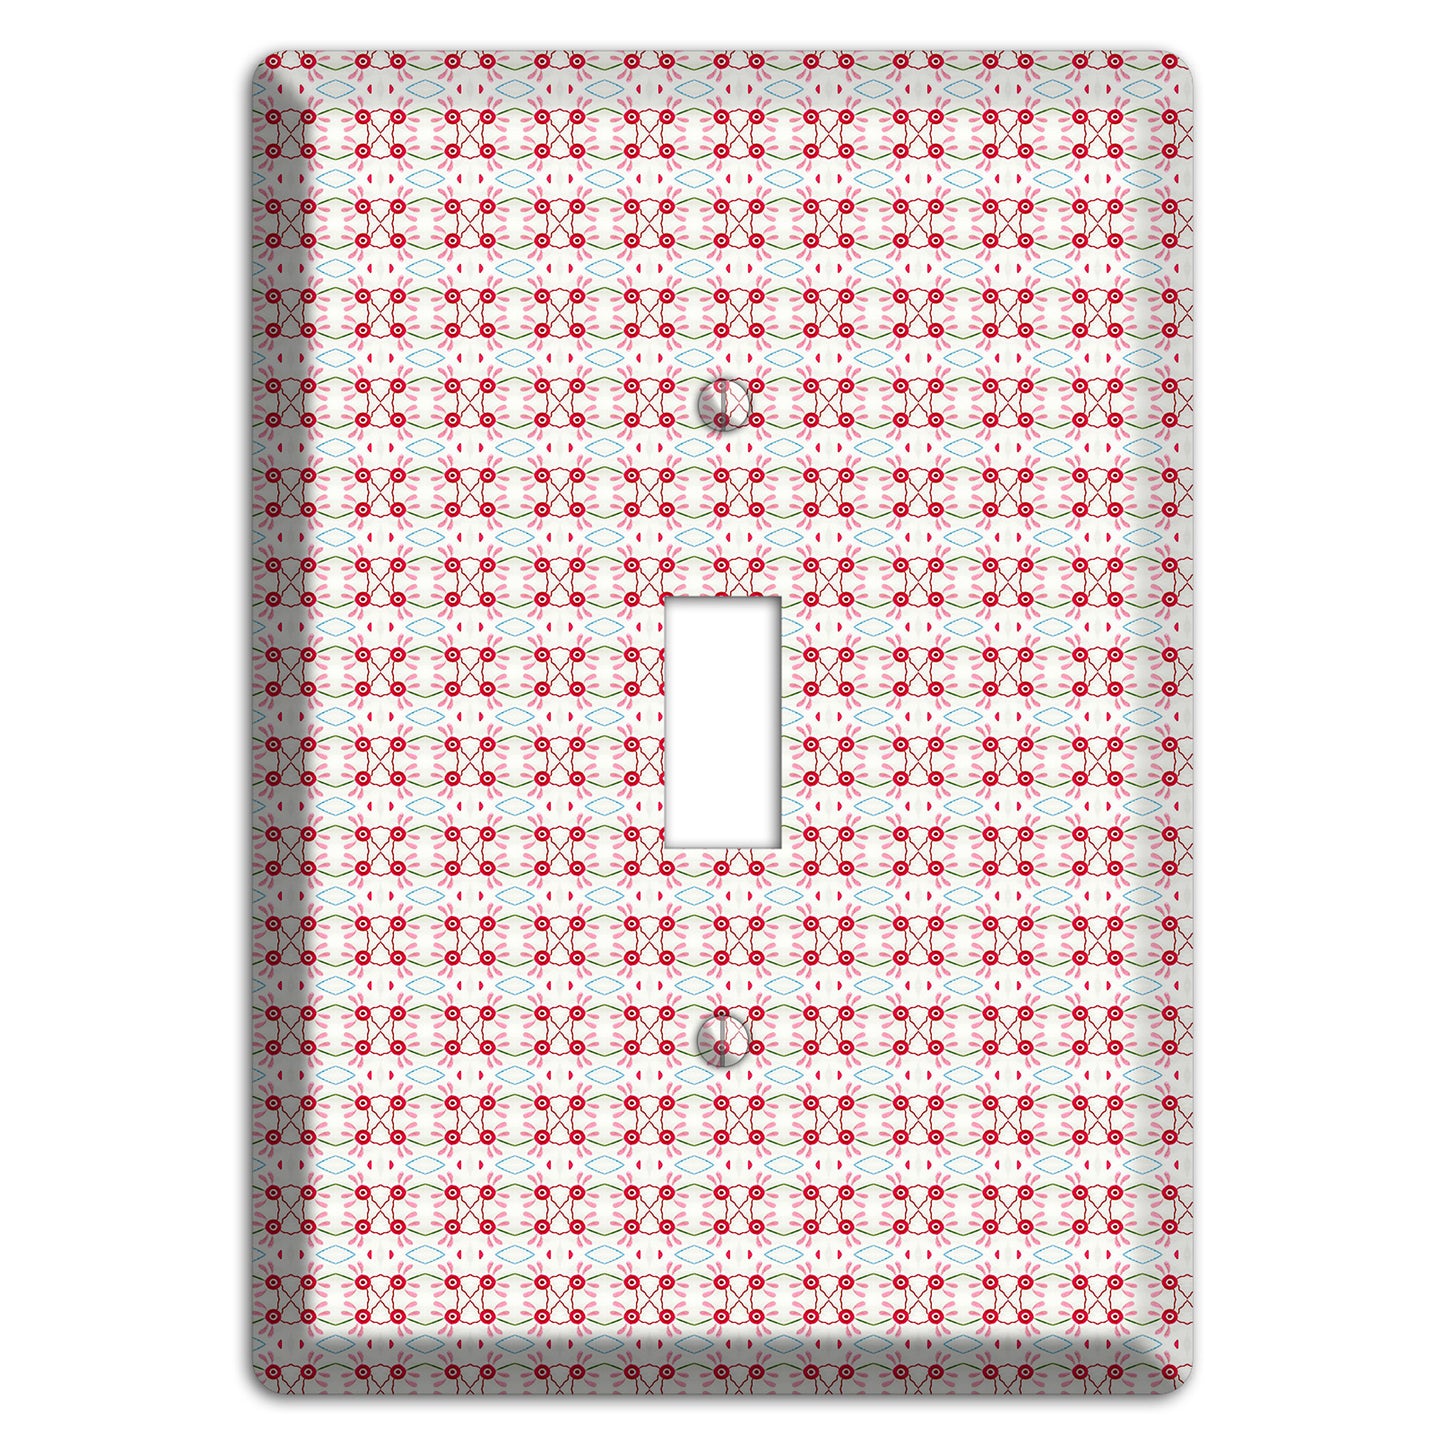 White with Red Ball and Stick Tapestry Cover Plates